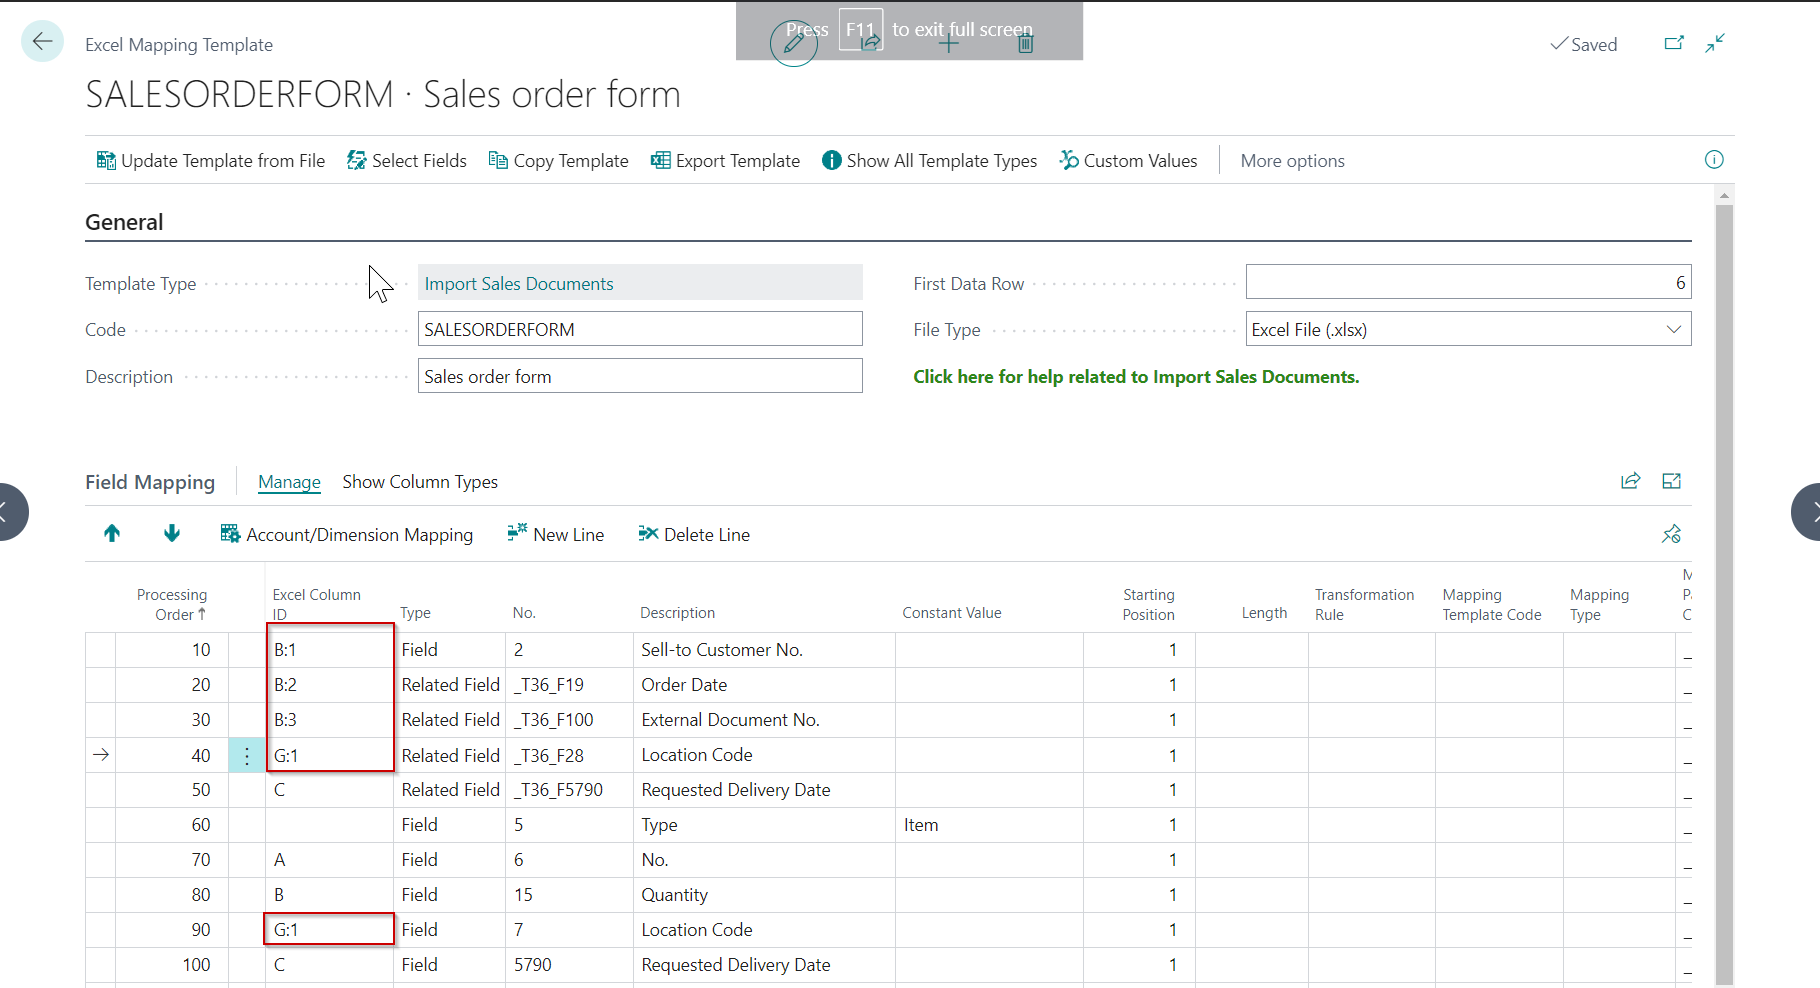 Sales Order Form Mapping Template